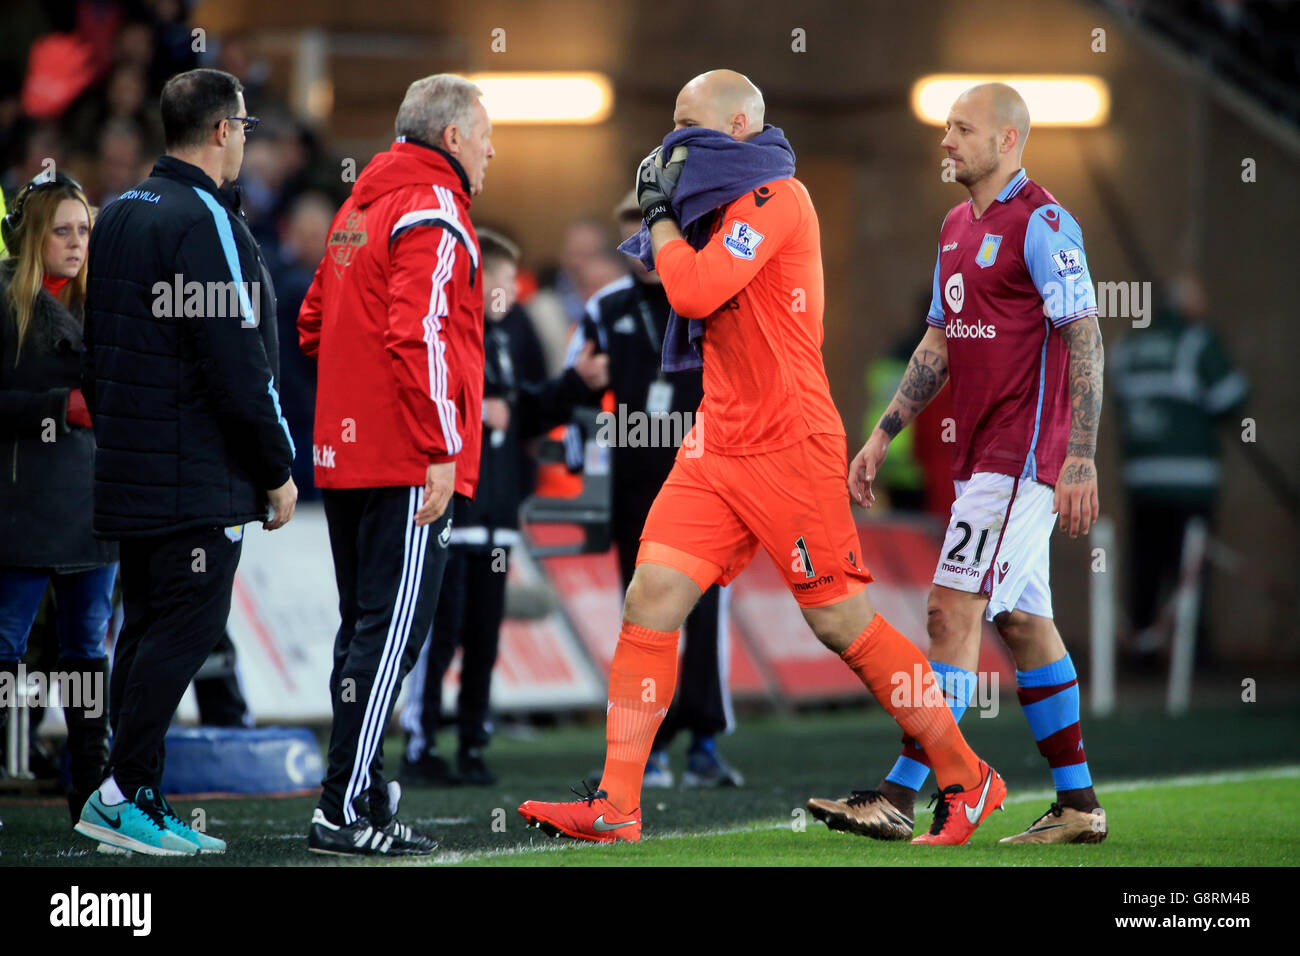 Aston Villa goalkeeper Brad Guzan and Alan Hutton (right) walk off detected after the Barclays Premier League match at the Liberty Stadium, Swansea. PRESS ASSOCIATION Photo. Picture date: Saturday March 19, 2016. See PA story SOCCER Swansea. Photo credit should read: Nick Potts/PA Wire. Stock Photo